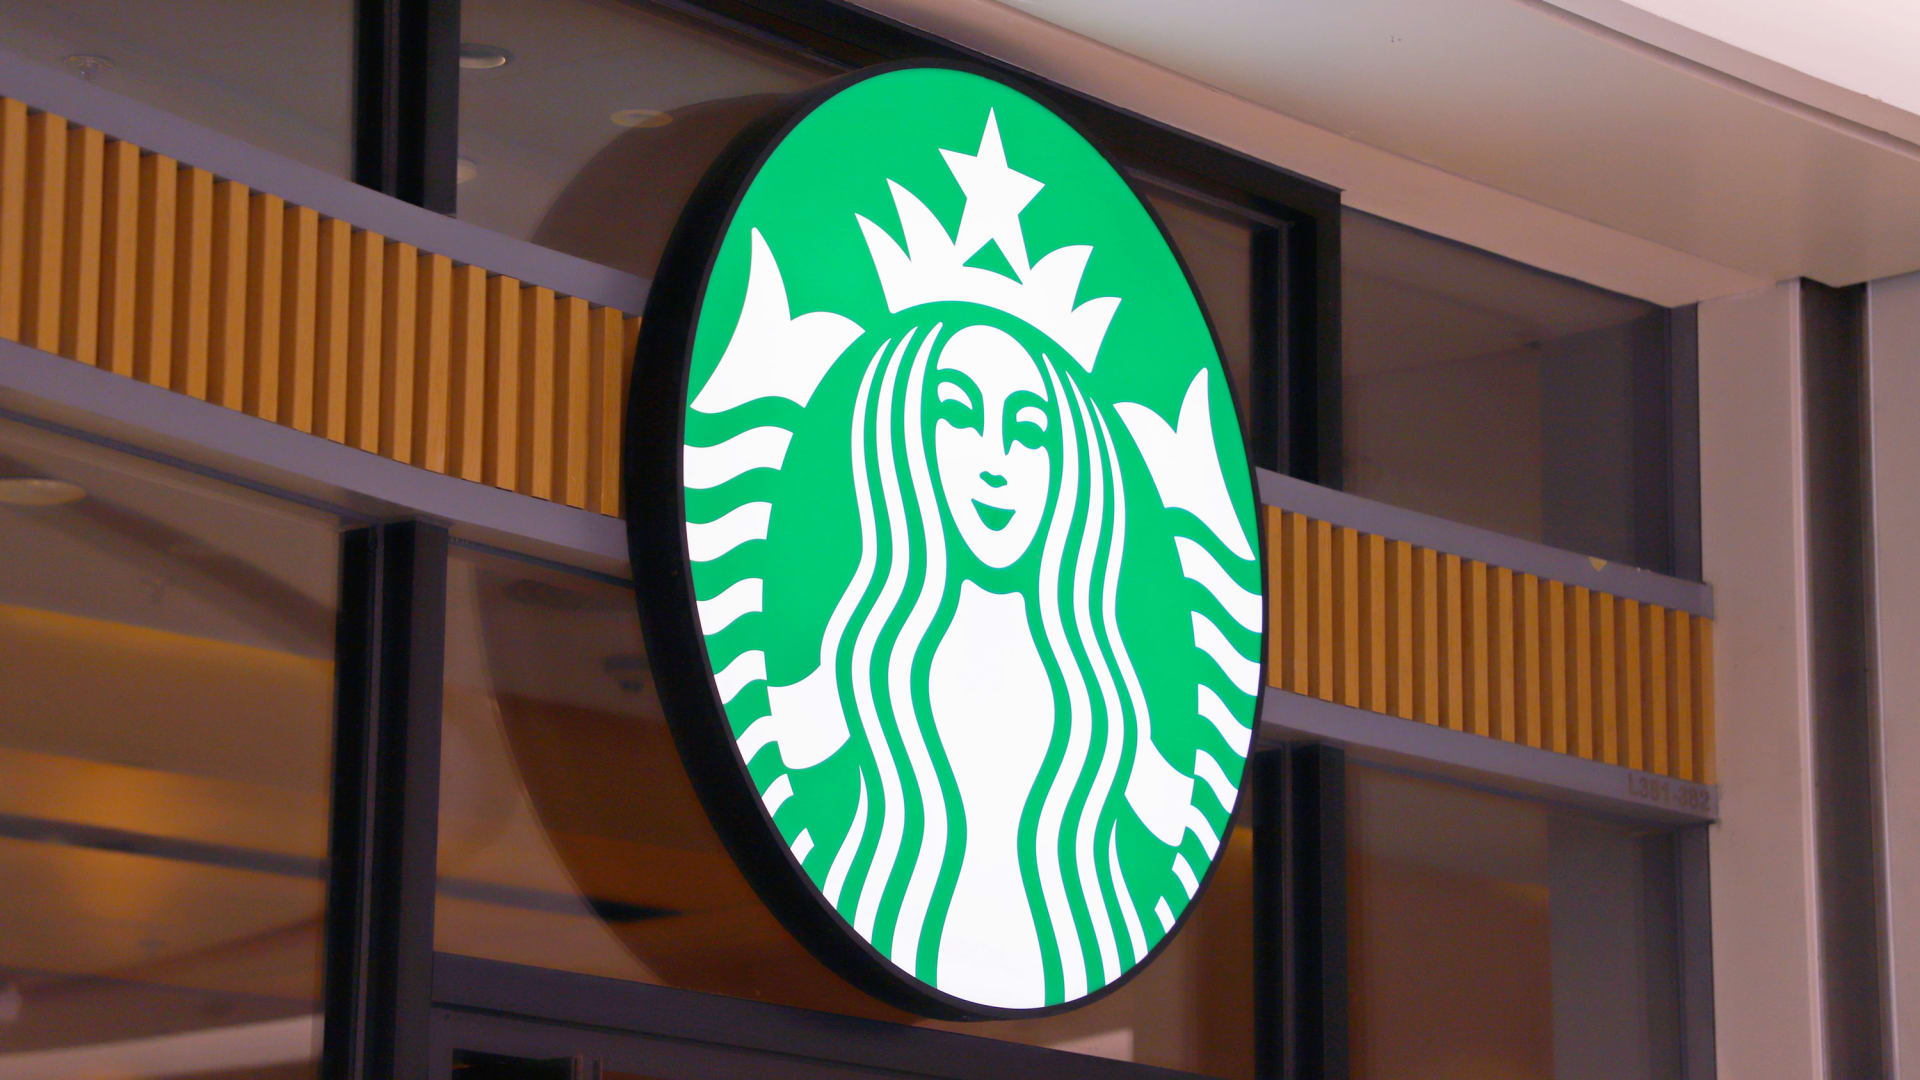 Starbucks Just Had a Corporate Governance Meltdown. Your Board Should Take Note